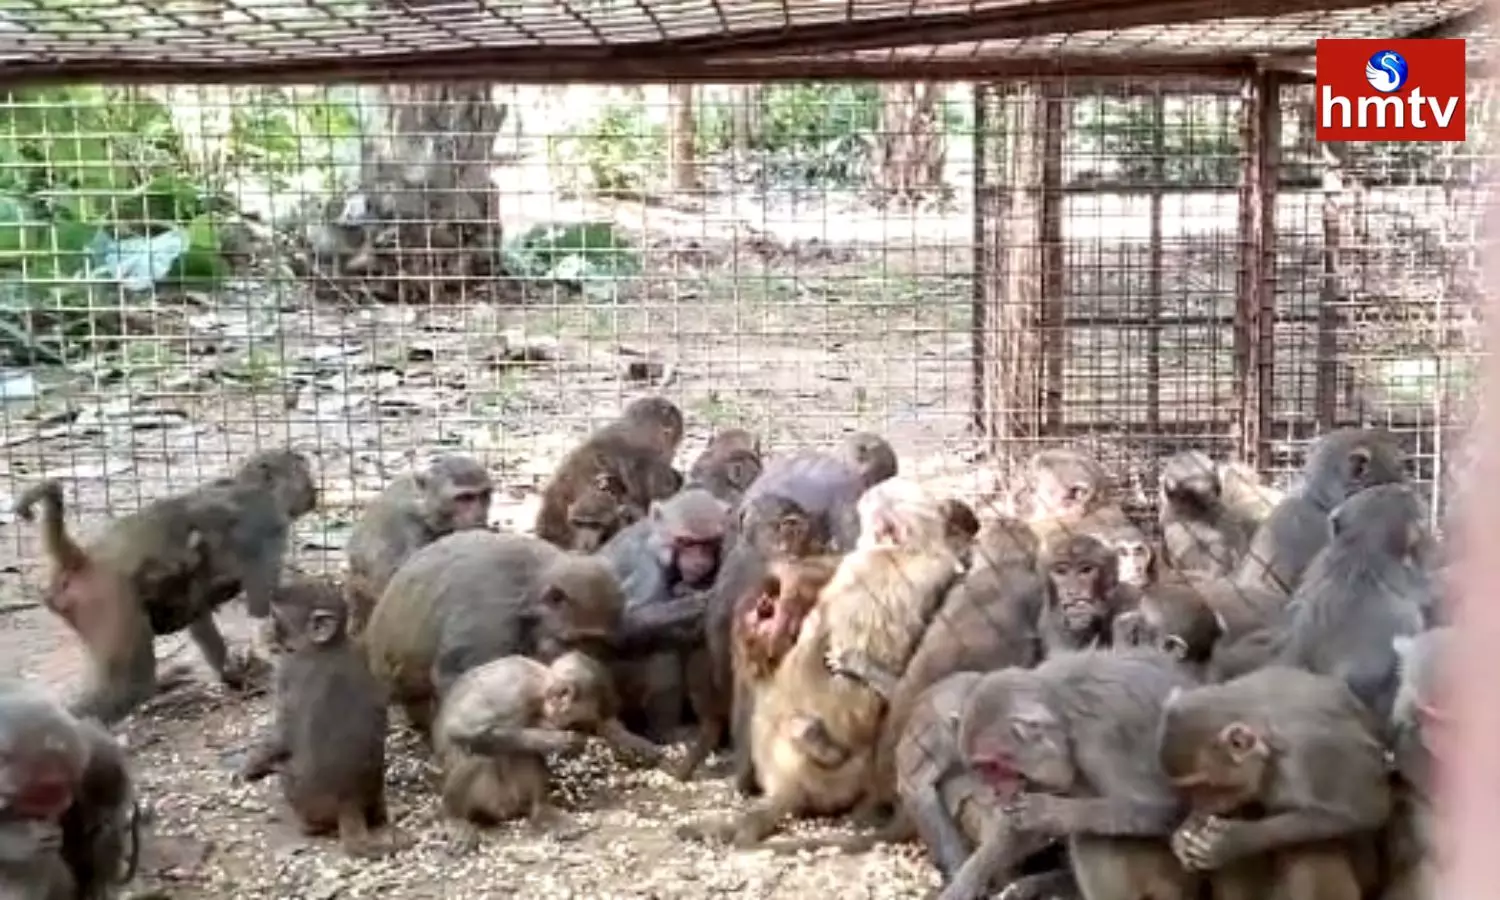 Monkeys Which That Have Been Creating Chaos For Years Have Been Caught Finally